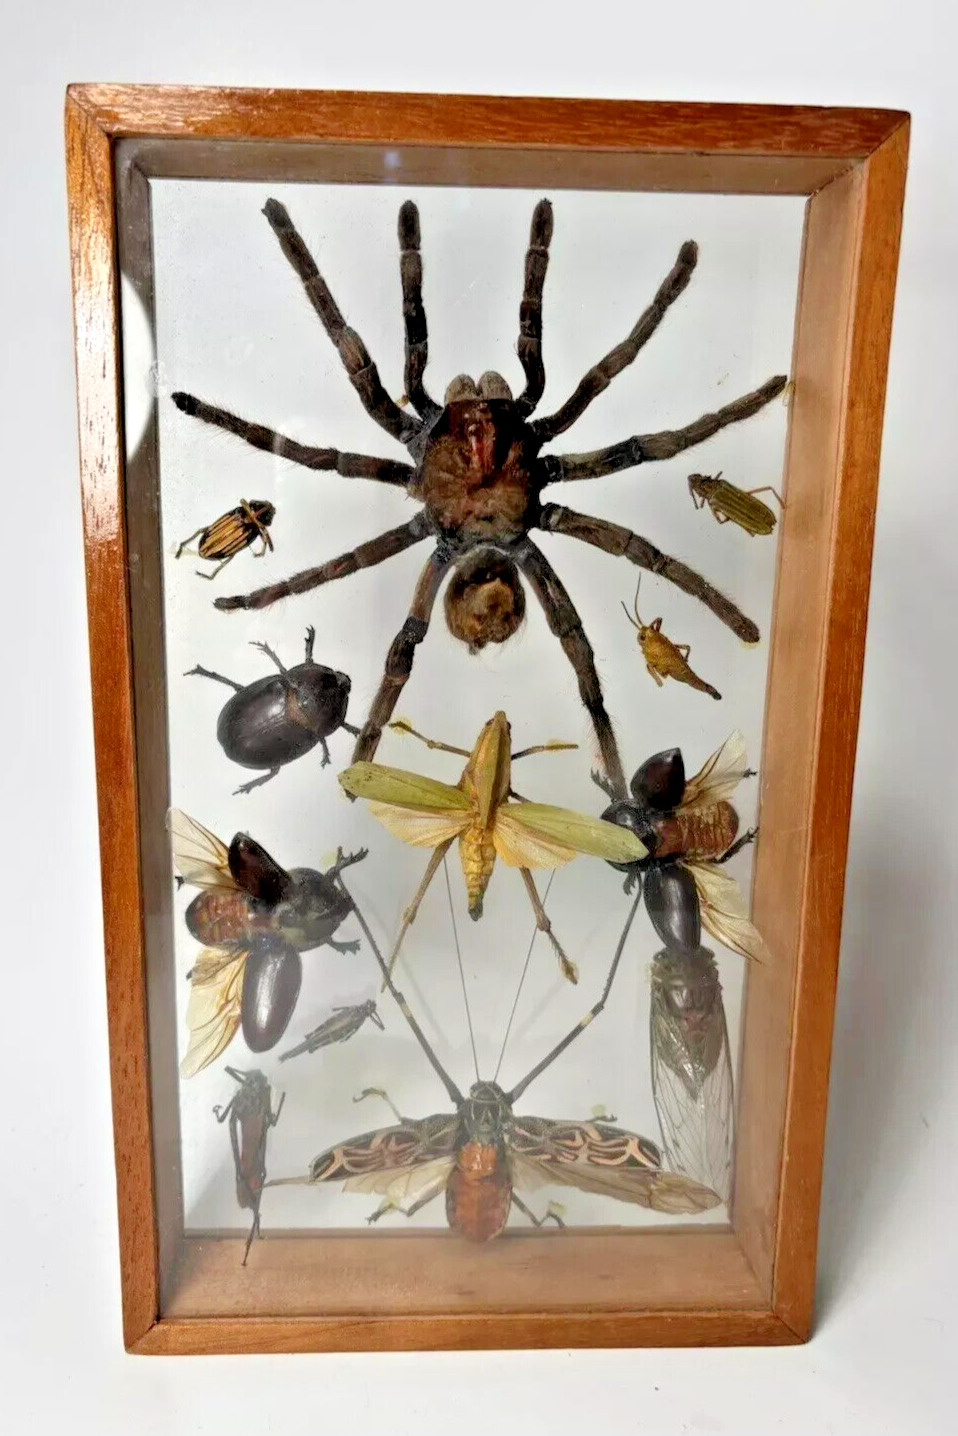 Vintage Real Tarantula Insects Bugs Collection Taxidermy Framed Wood Display Box